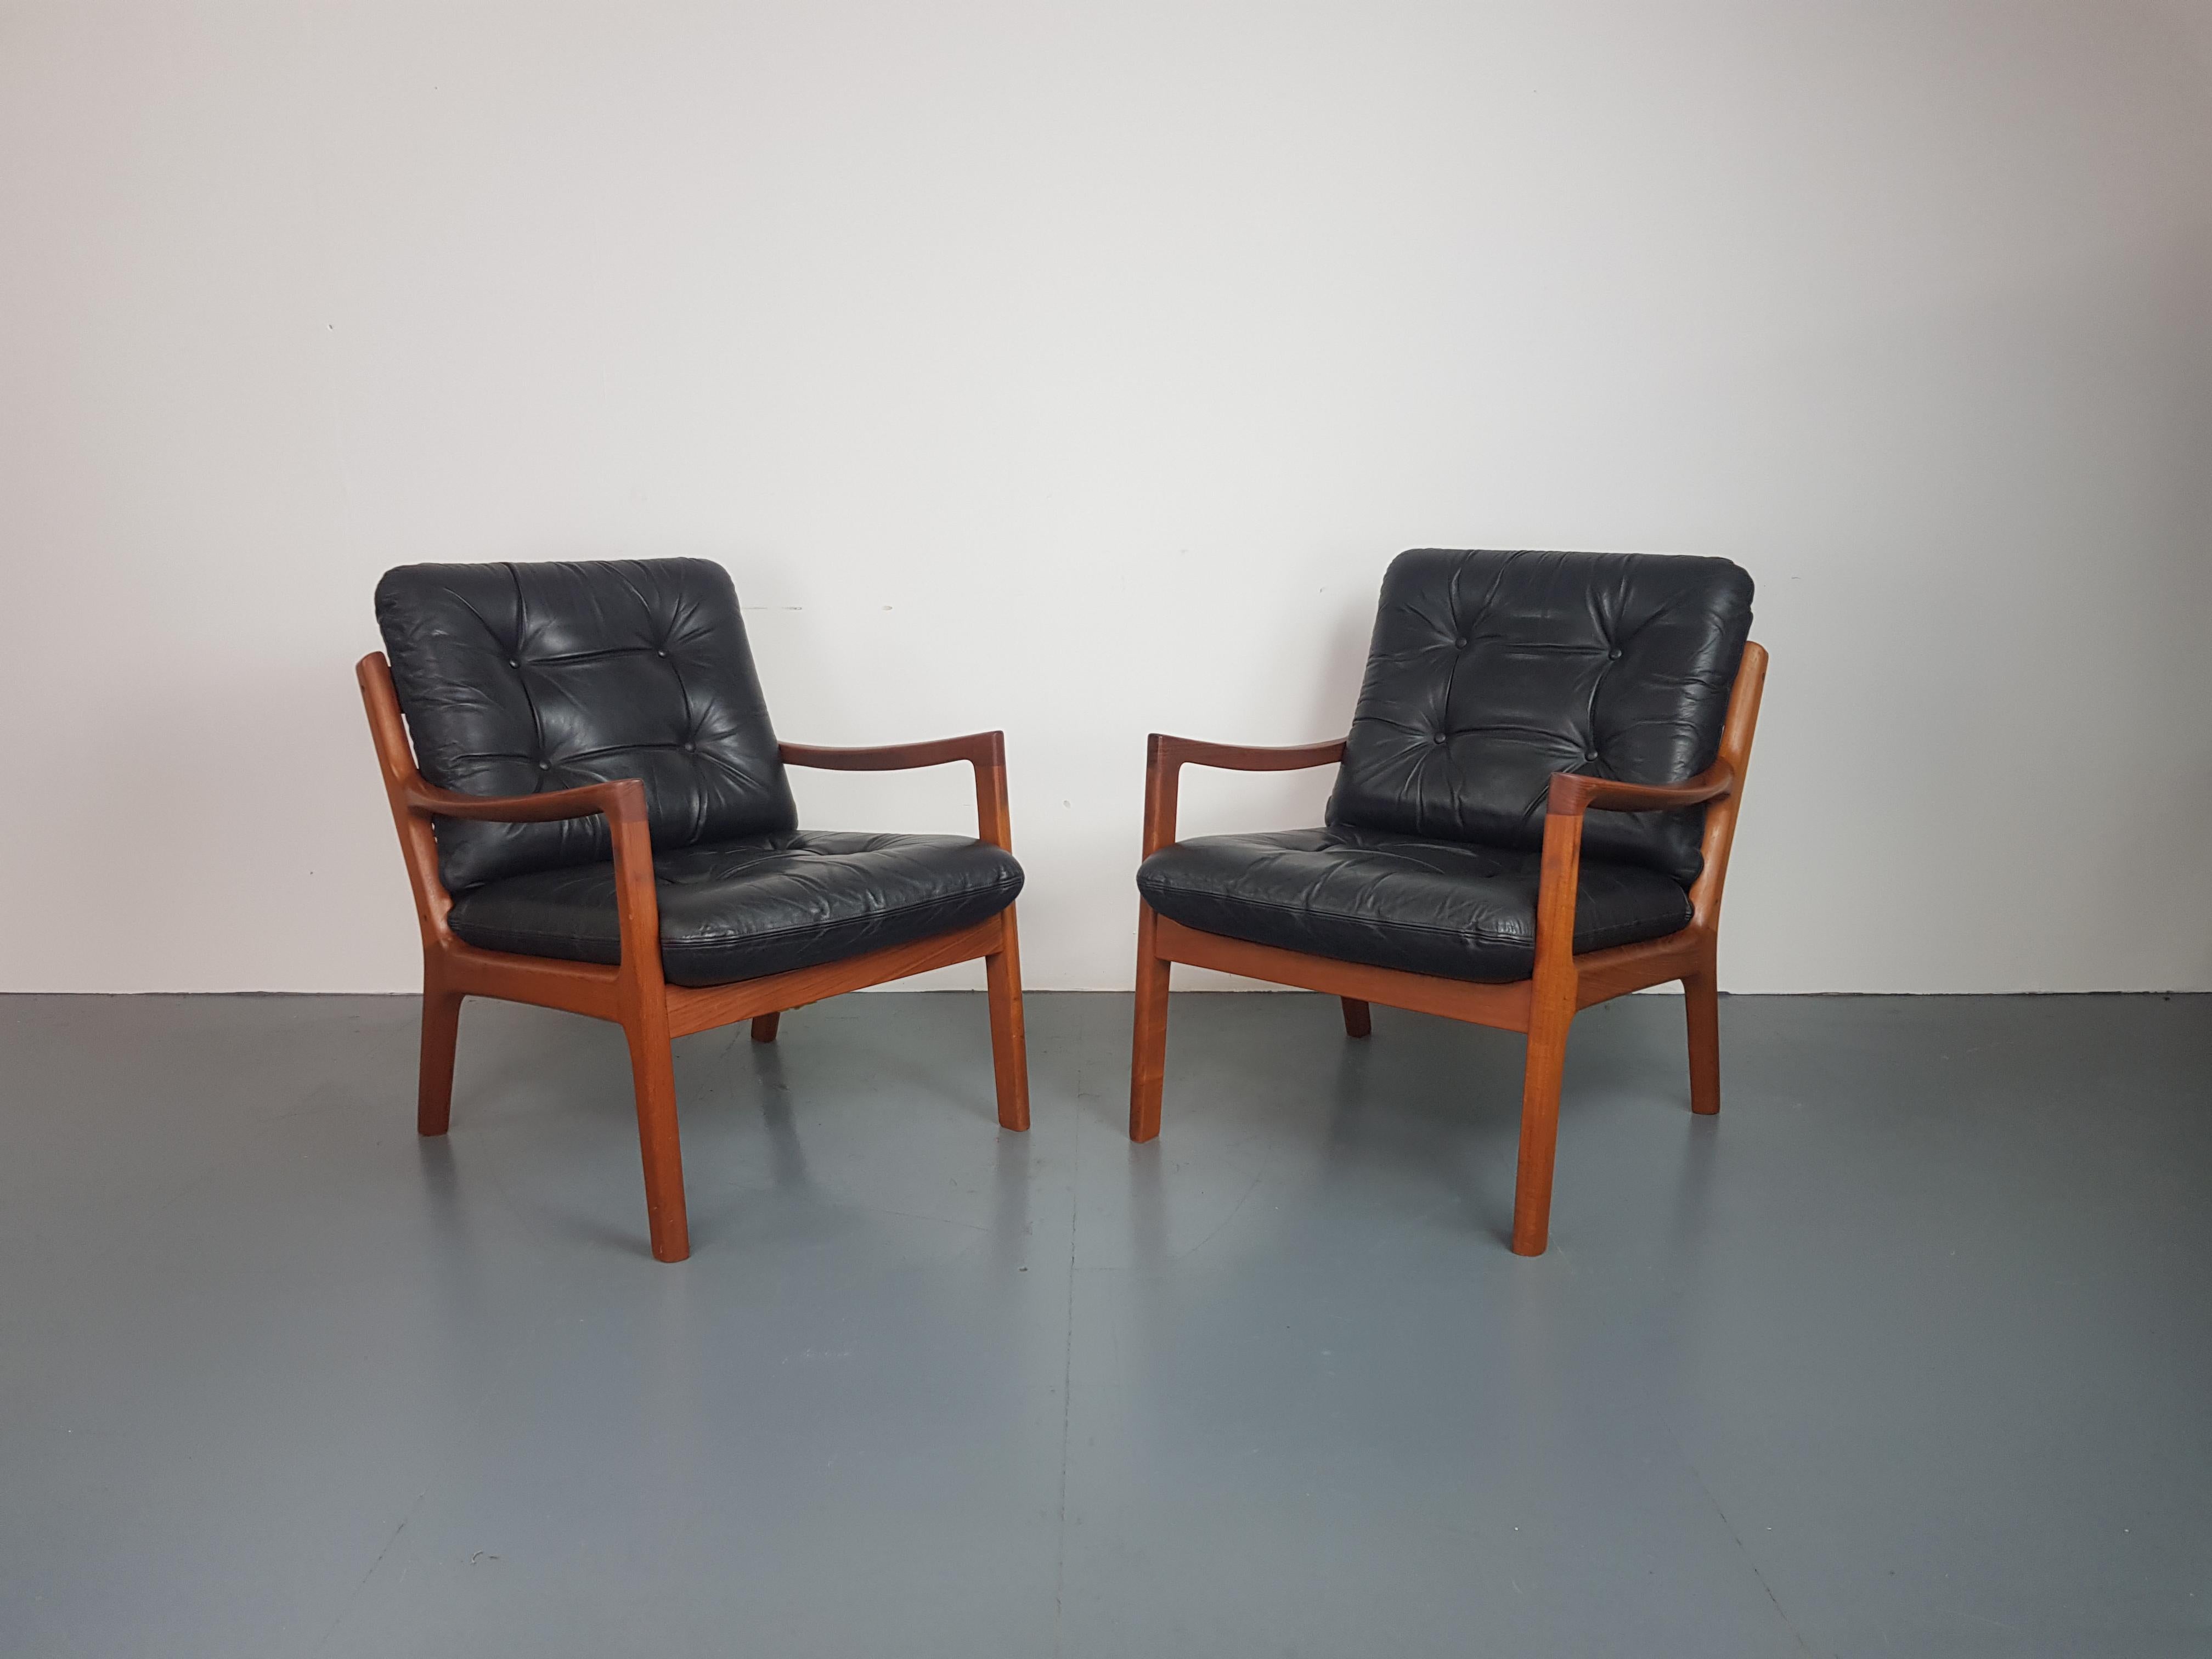 Pair of 1960s teak lounge chairs designed by Ole Wanscher for Cado.  Solid teak, with beautifully designed curved arms.  With 2 thick black leather cushions, making the chair supremely comfortable.
Approx dimensions:

Width 69 cm

Height 79